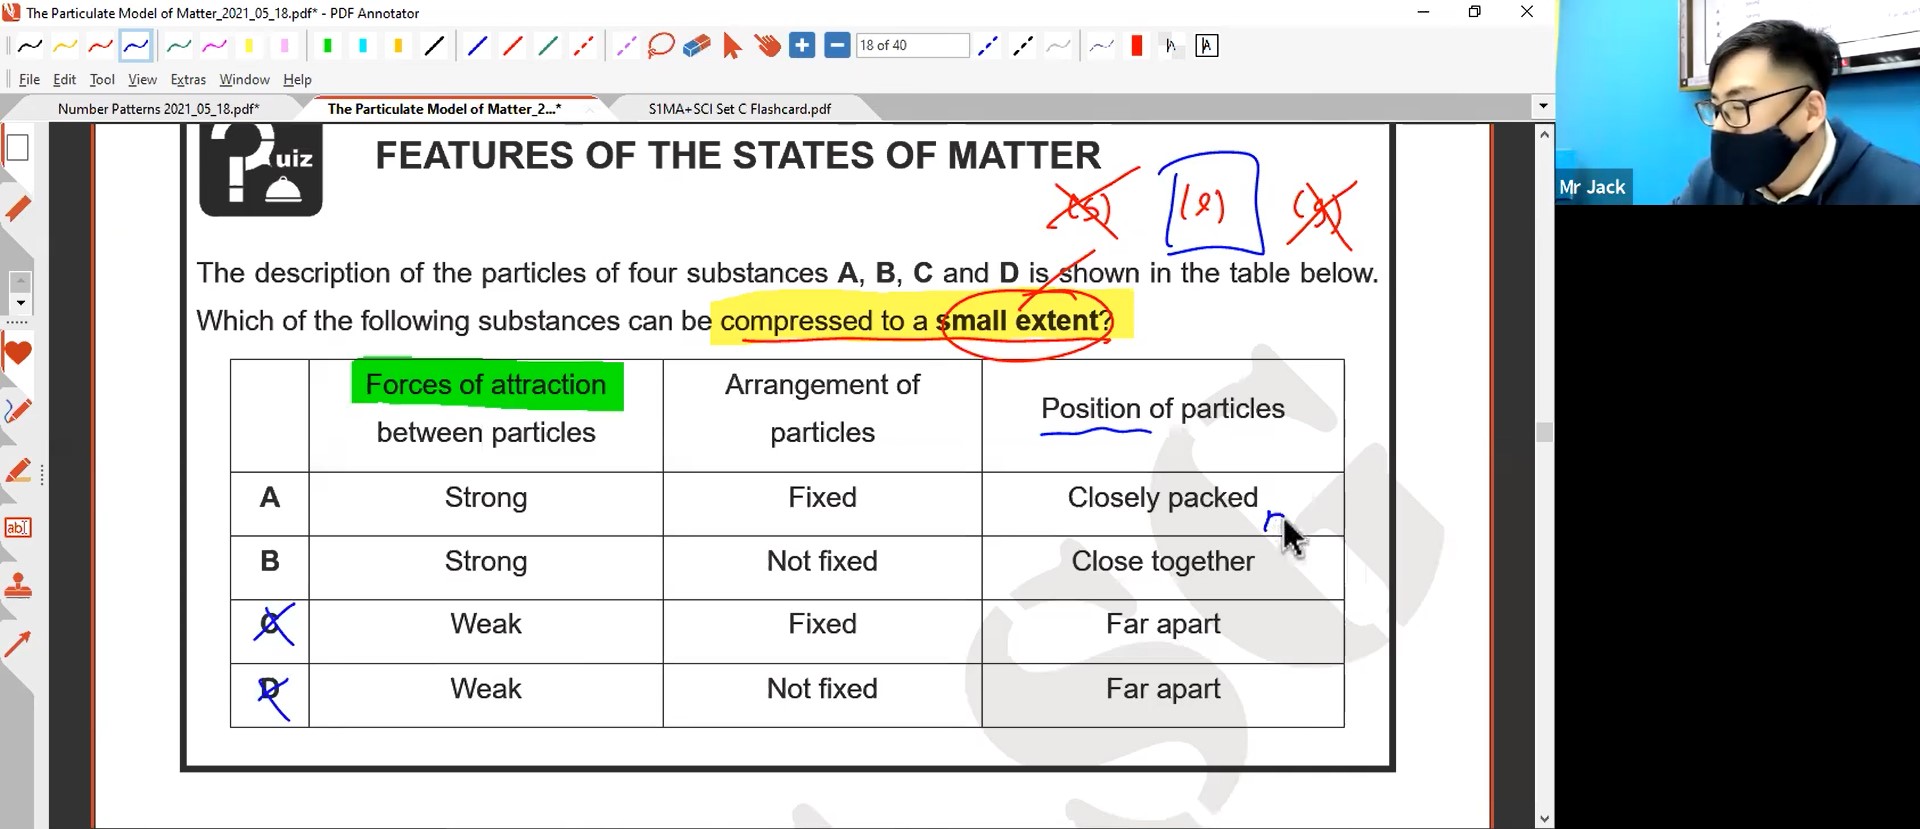 [KINETIC PARTICLE THEORY] States of matter